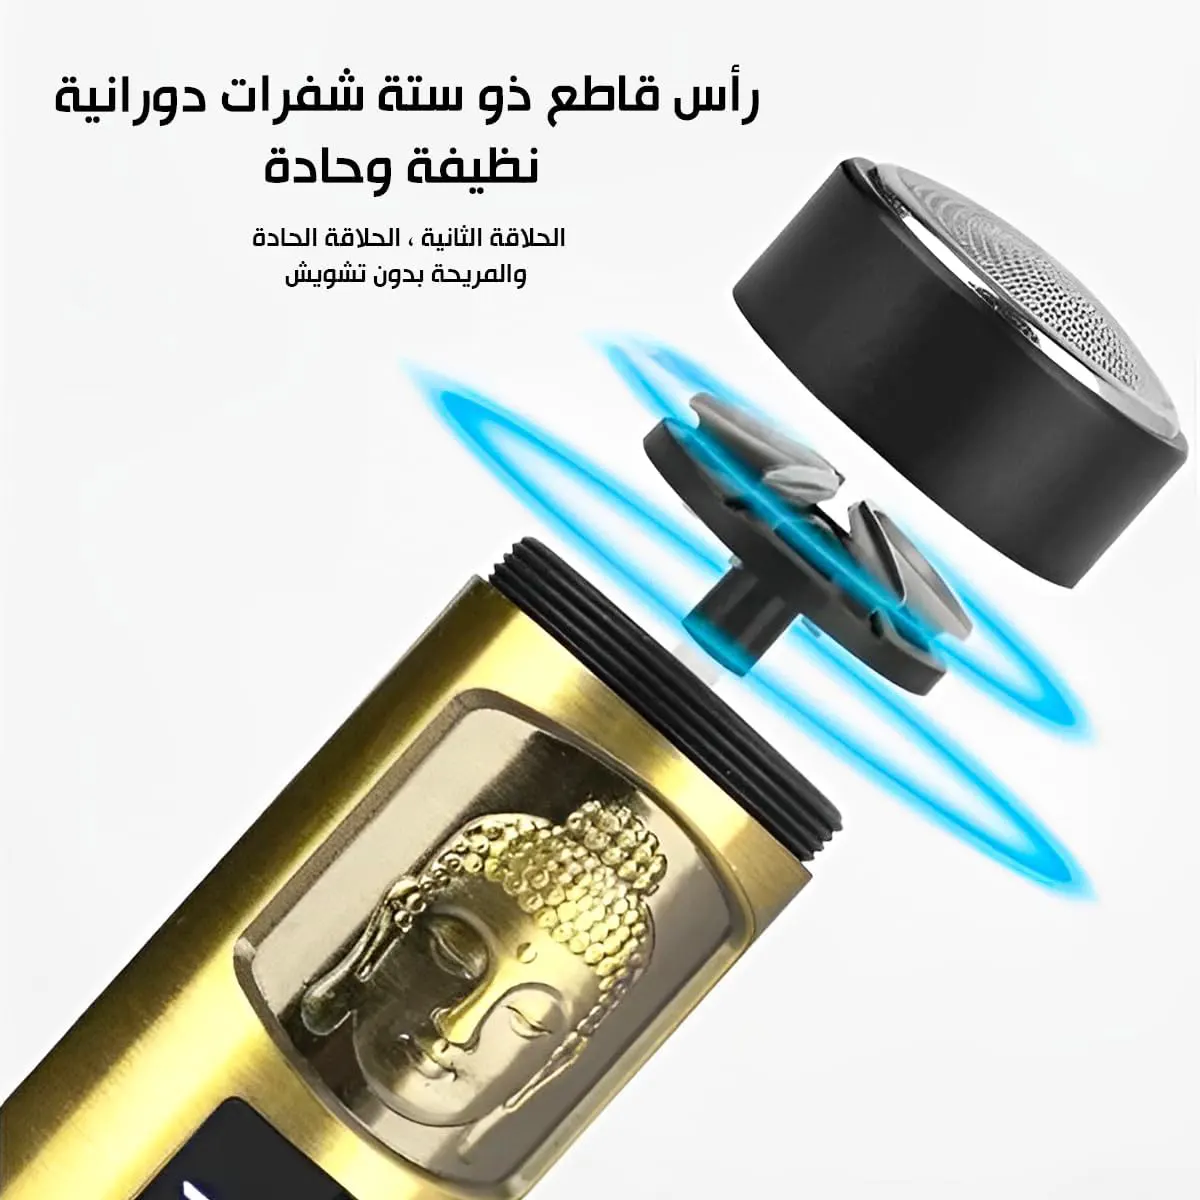 Kemei electric shaver, for hair straightening, 600 mAh battery, gold, KM-1328